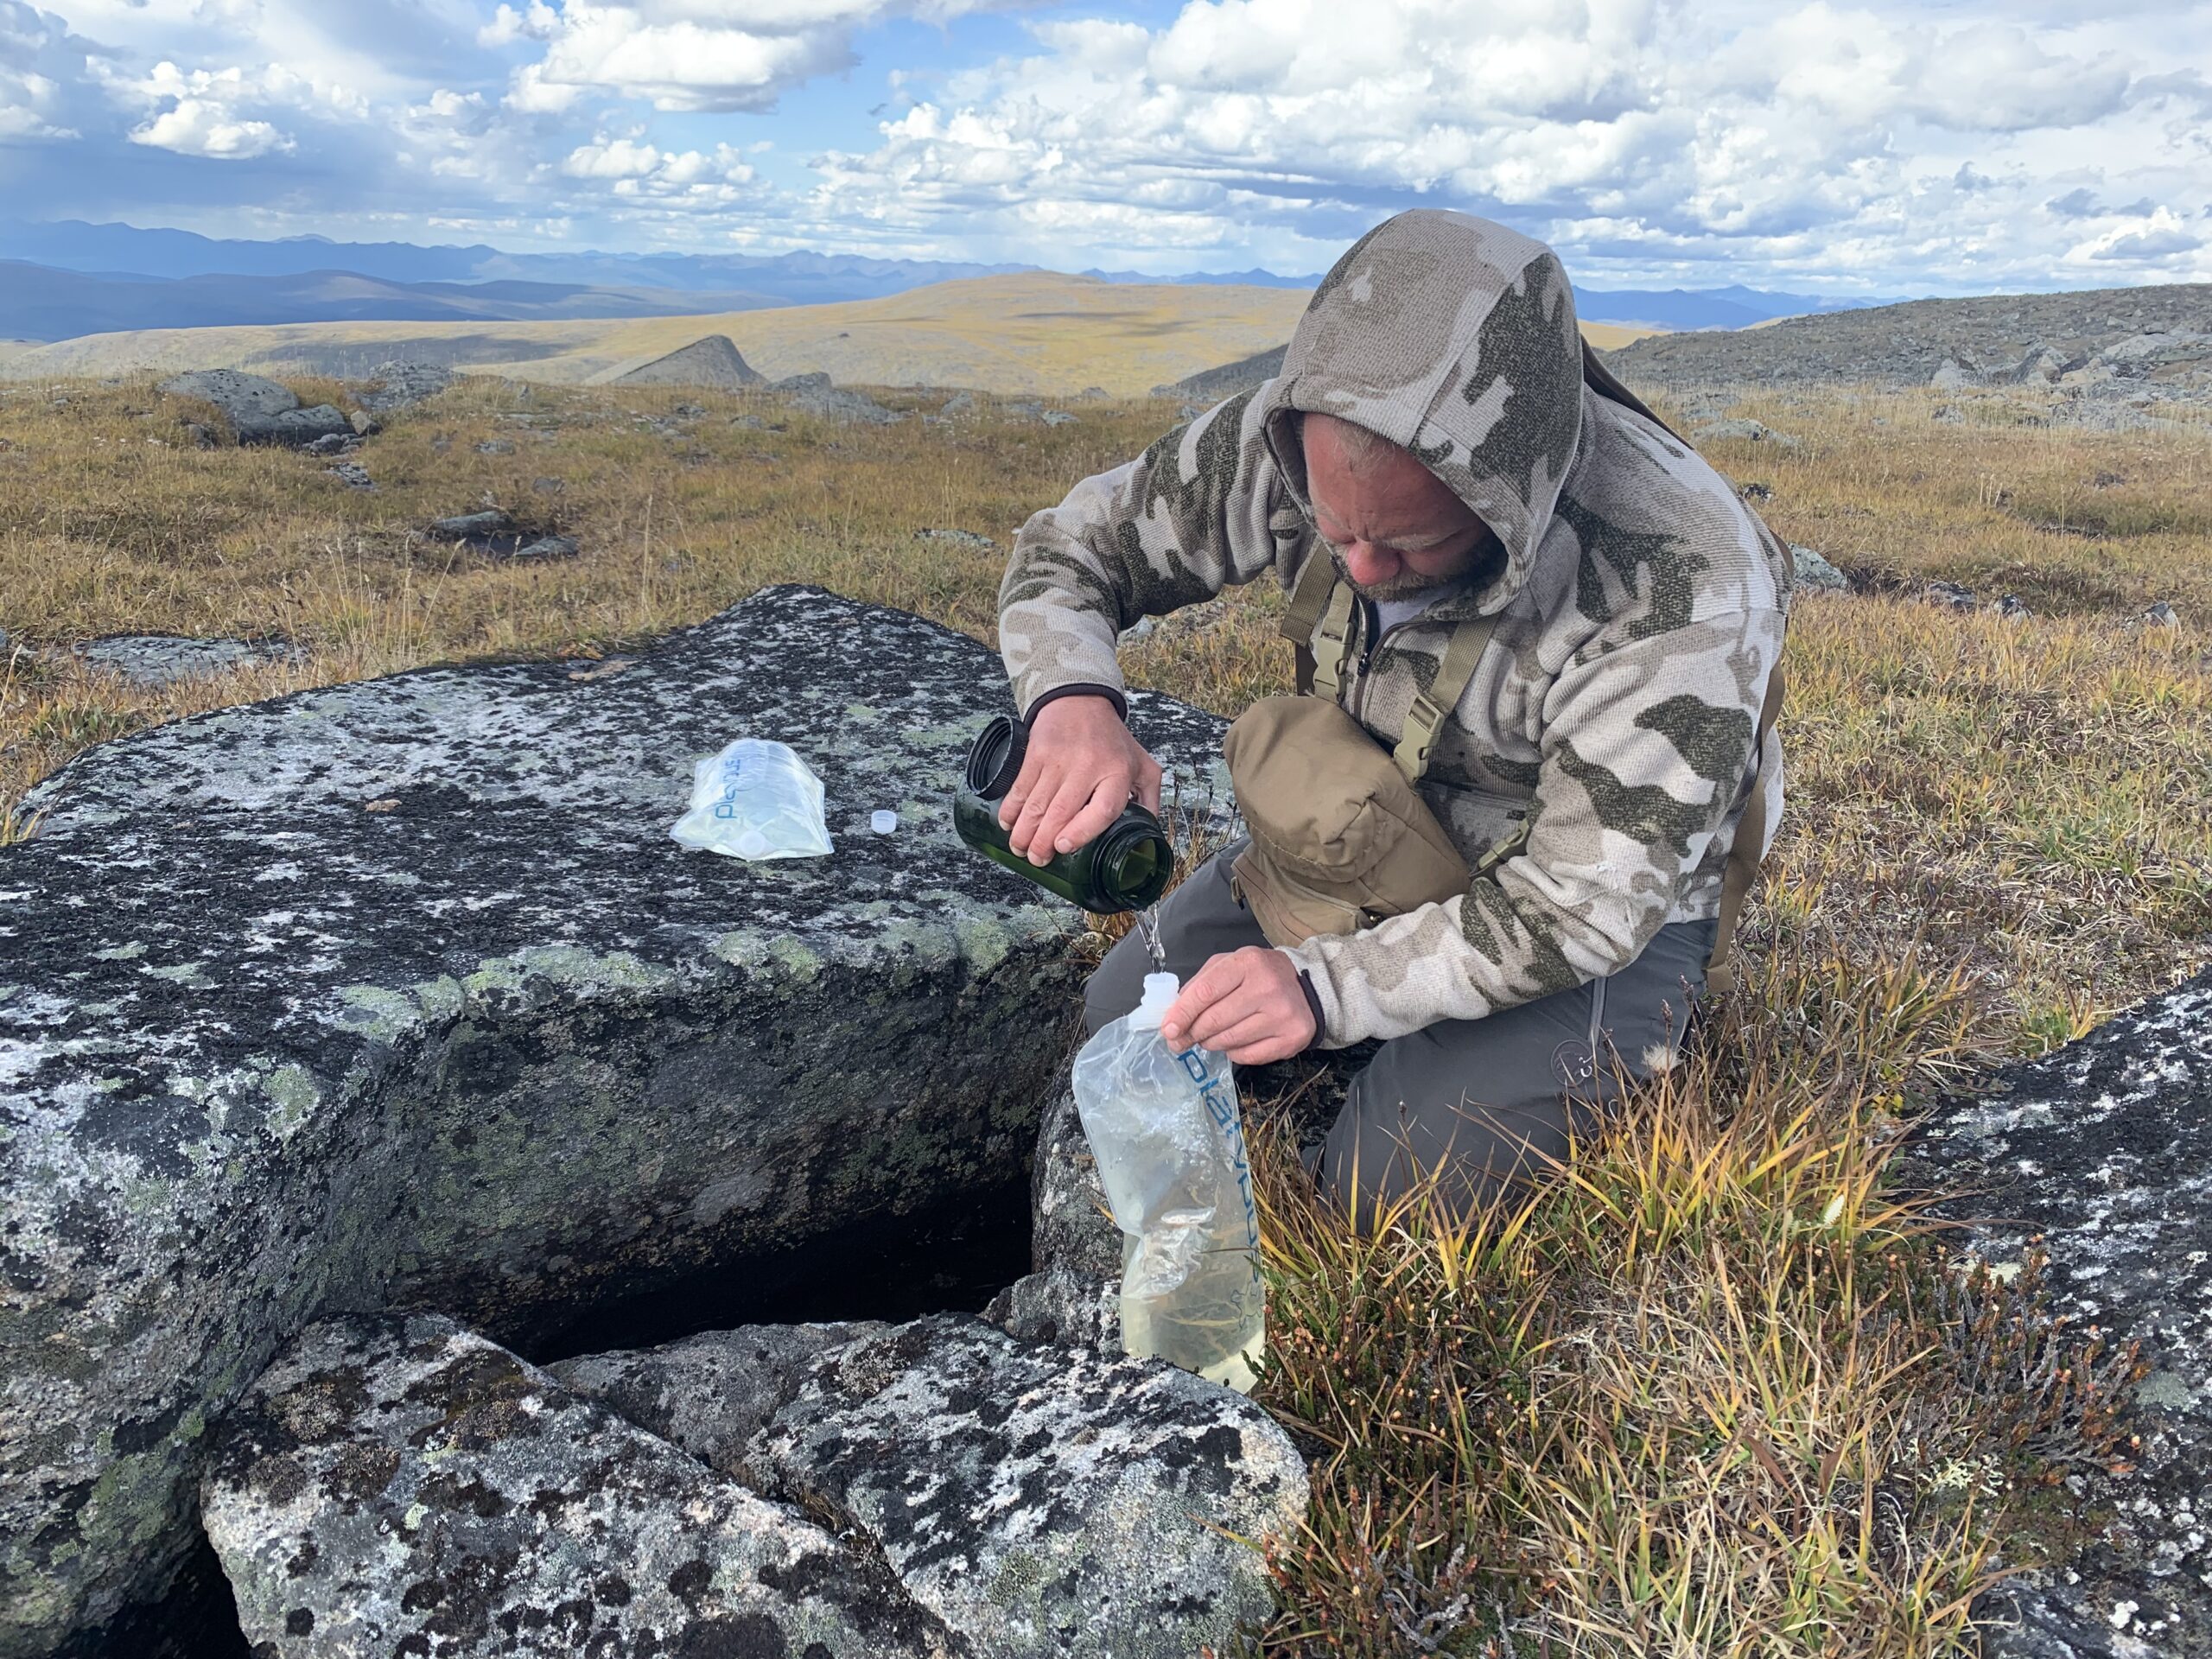 Shultz collects water from underneath a rock